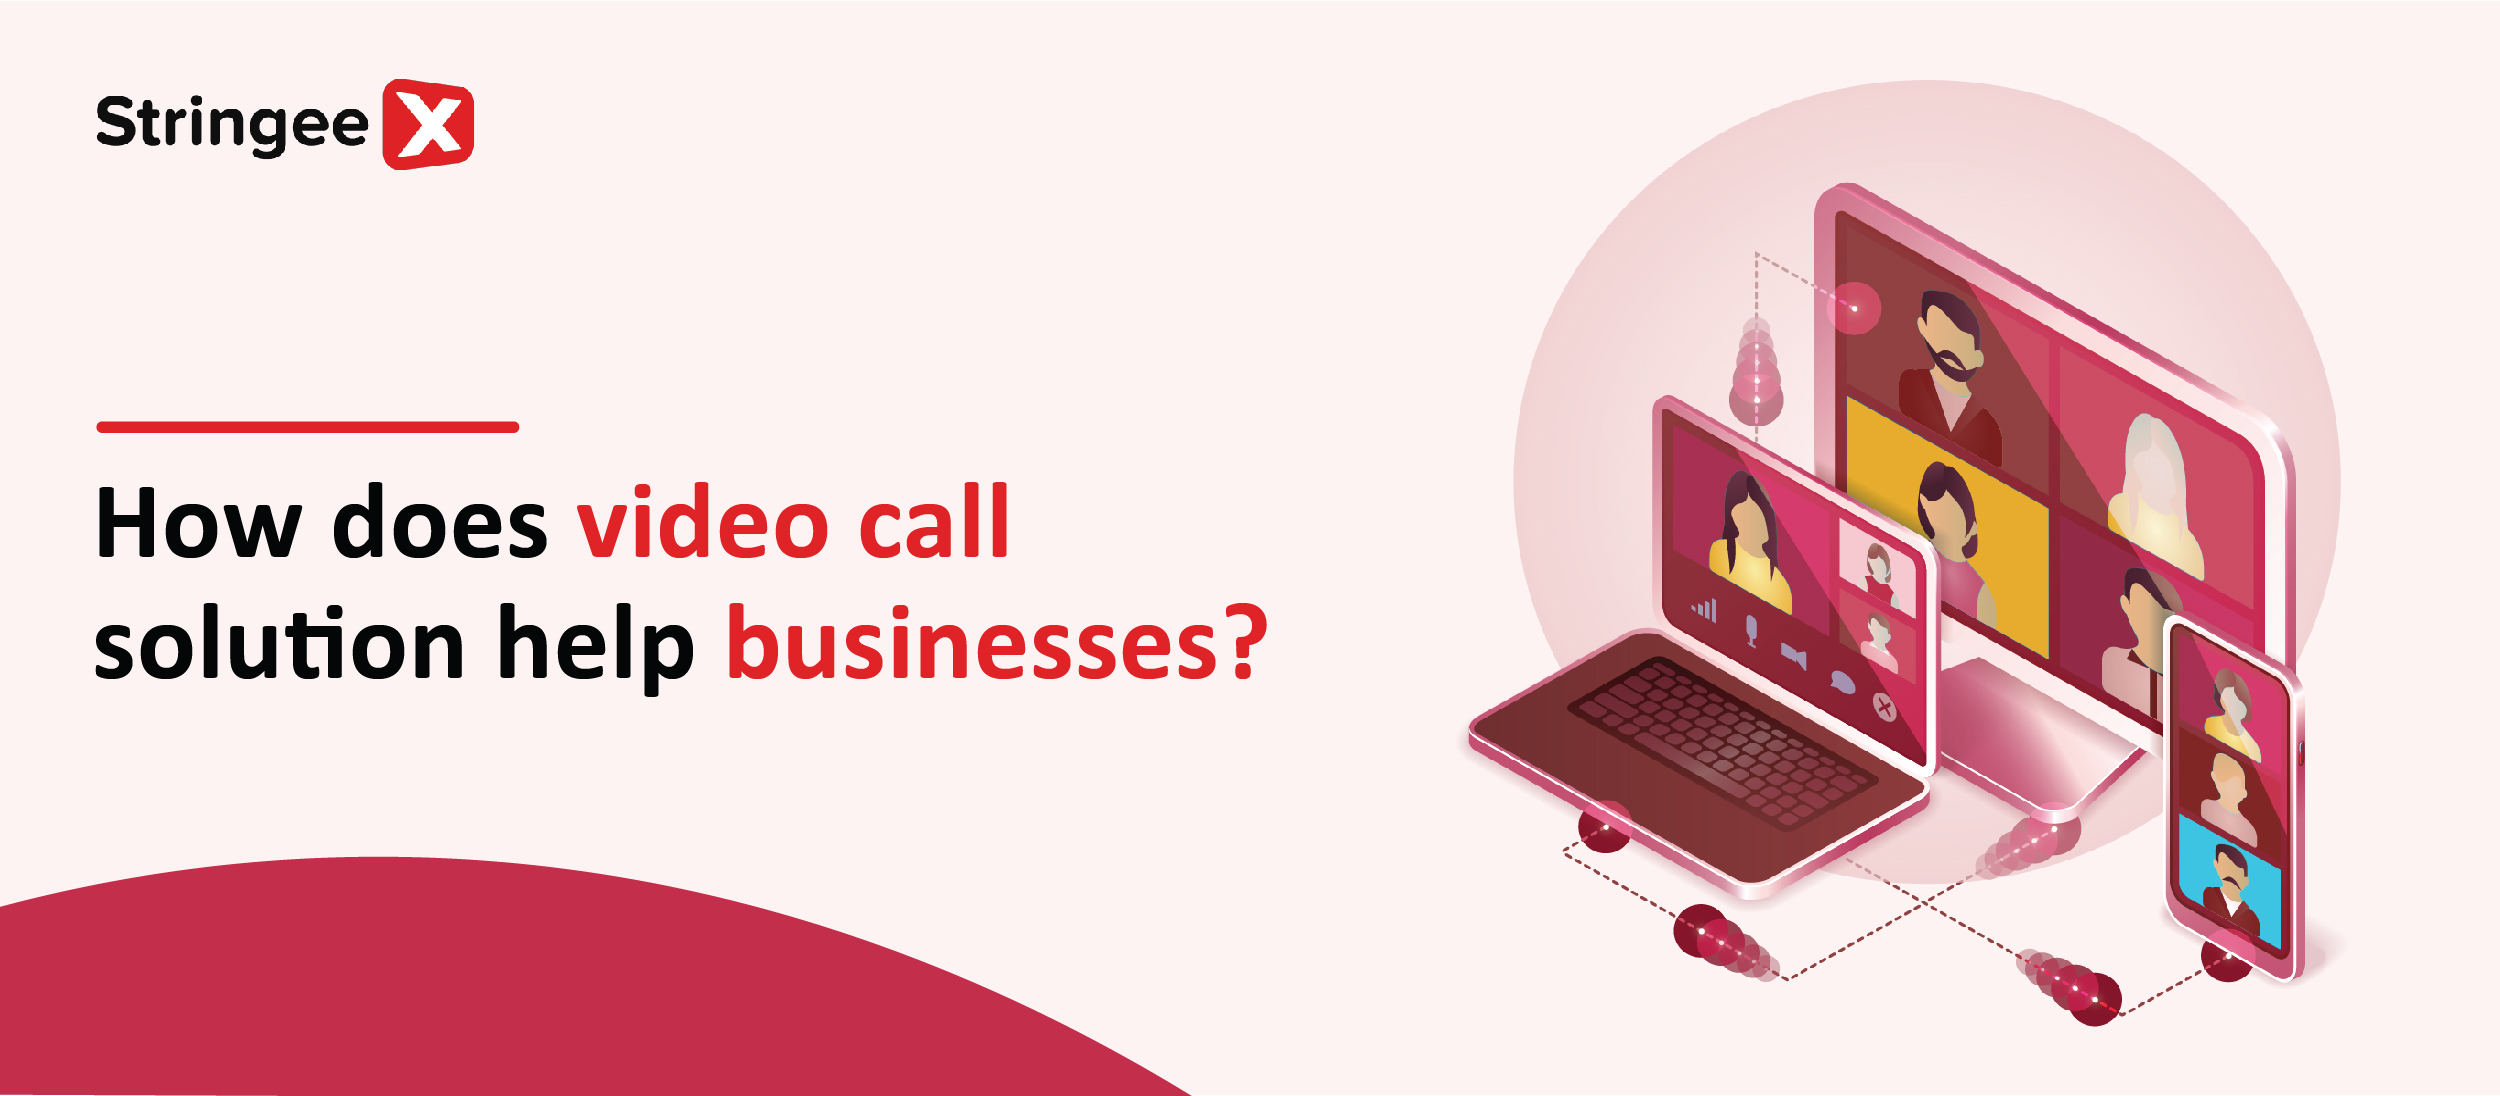 How Does Video Call Solution Help Businesses?